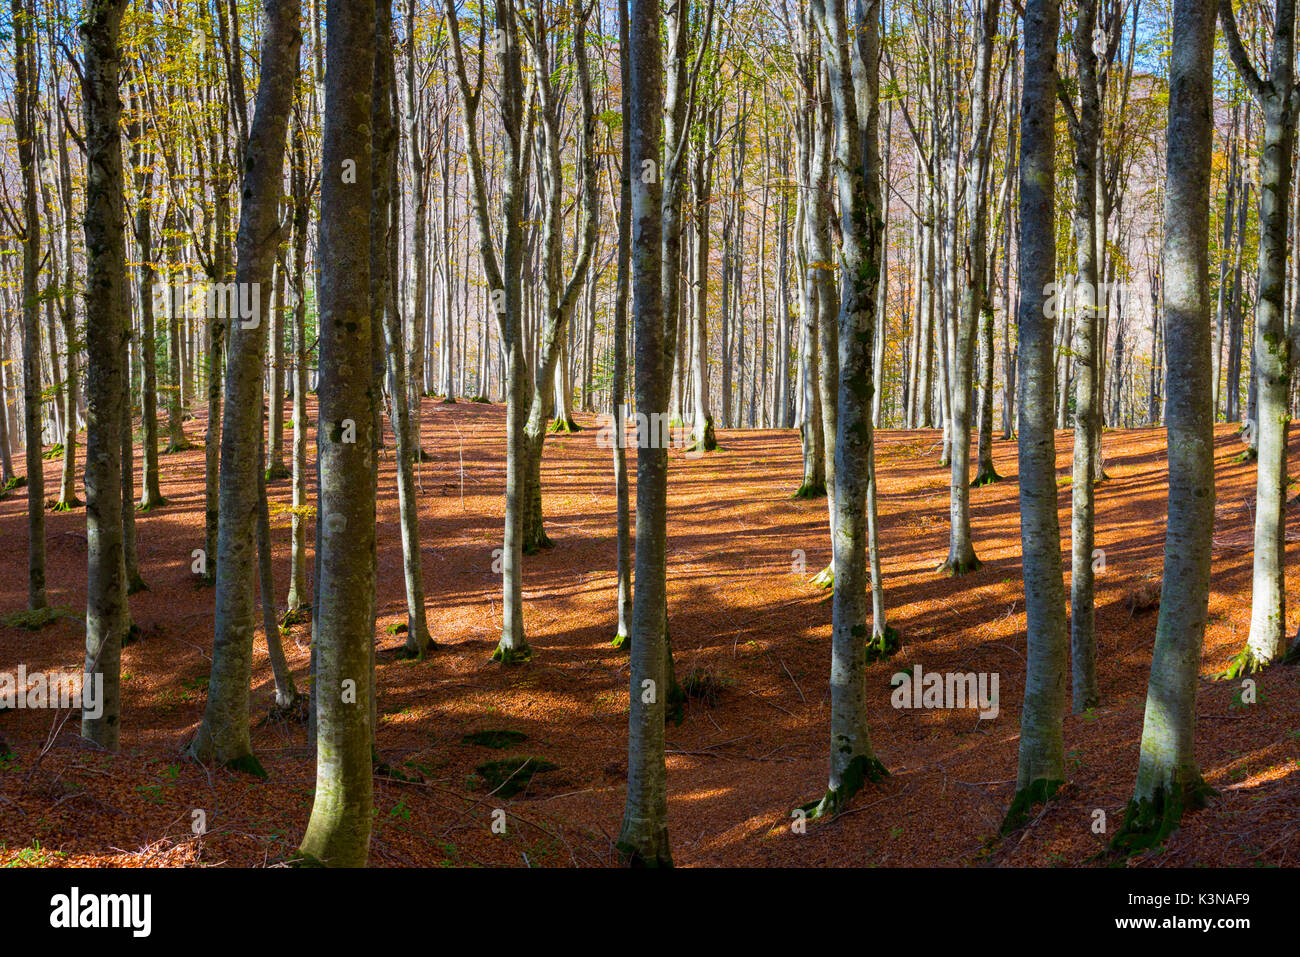 Trunks of holms in autumn, Casentinesi forest, Tuscany, Italy Stock Photo